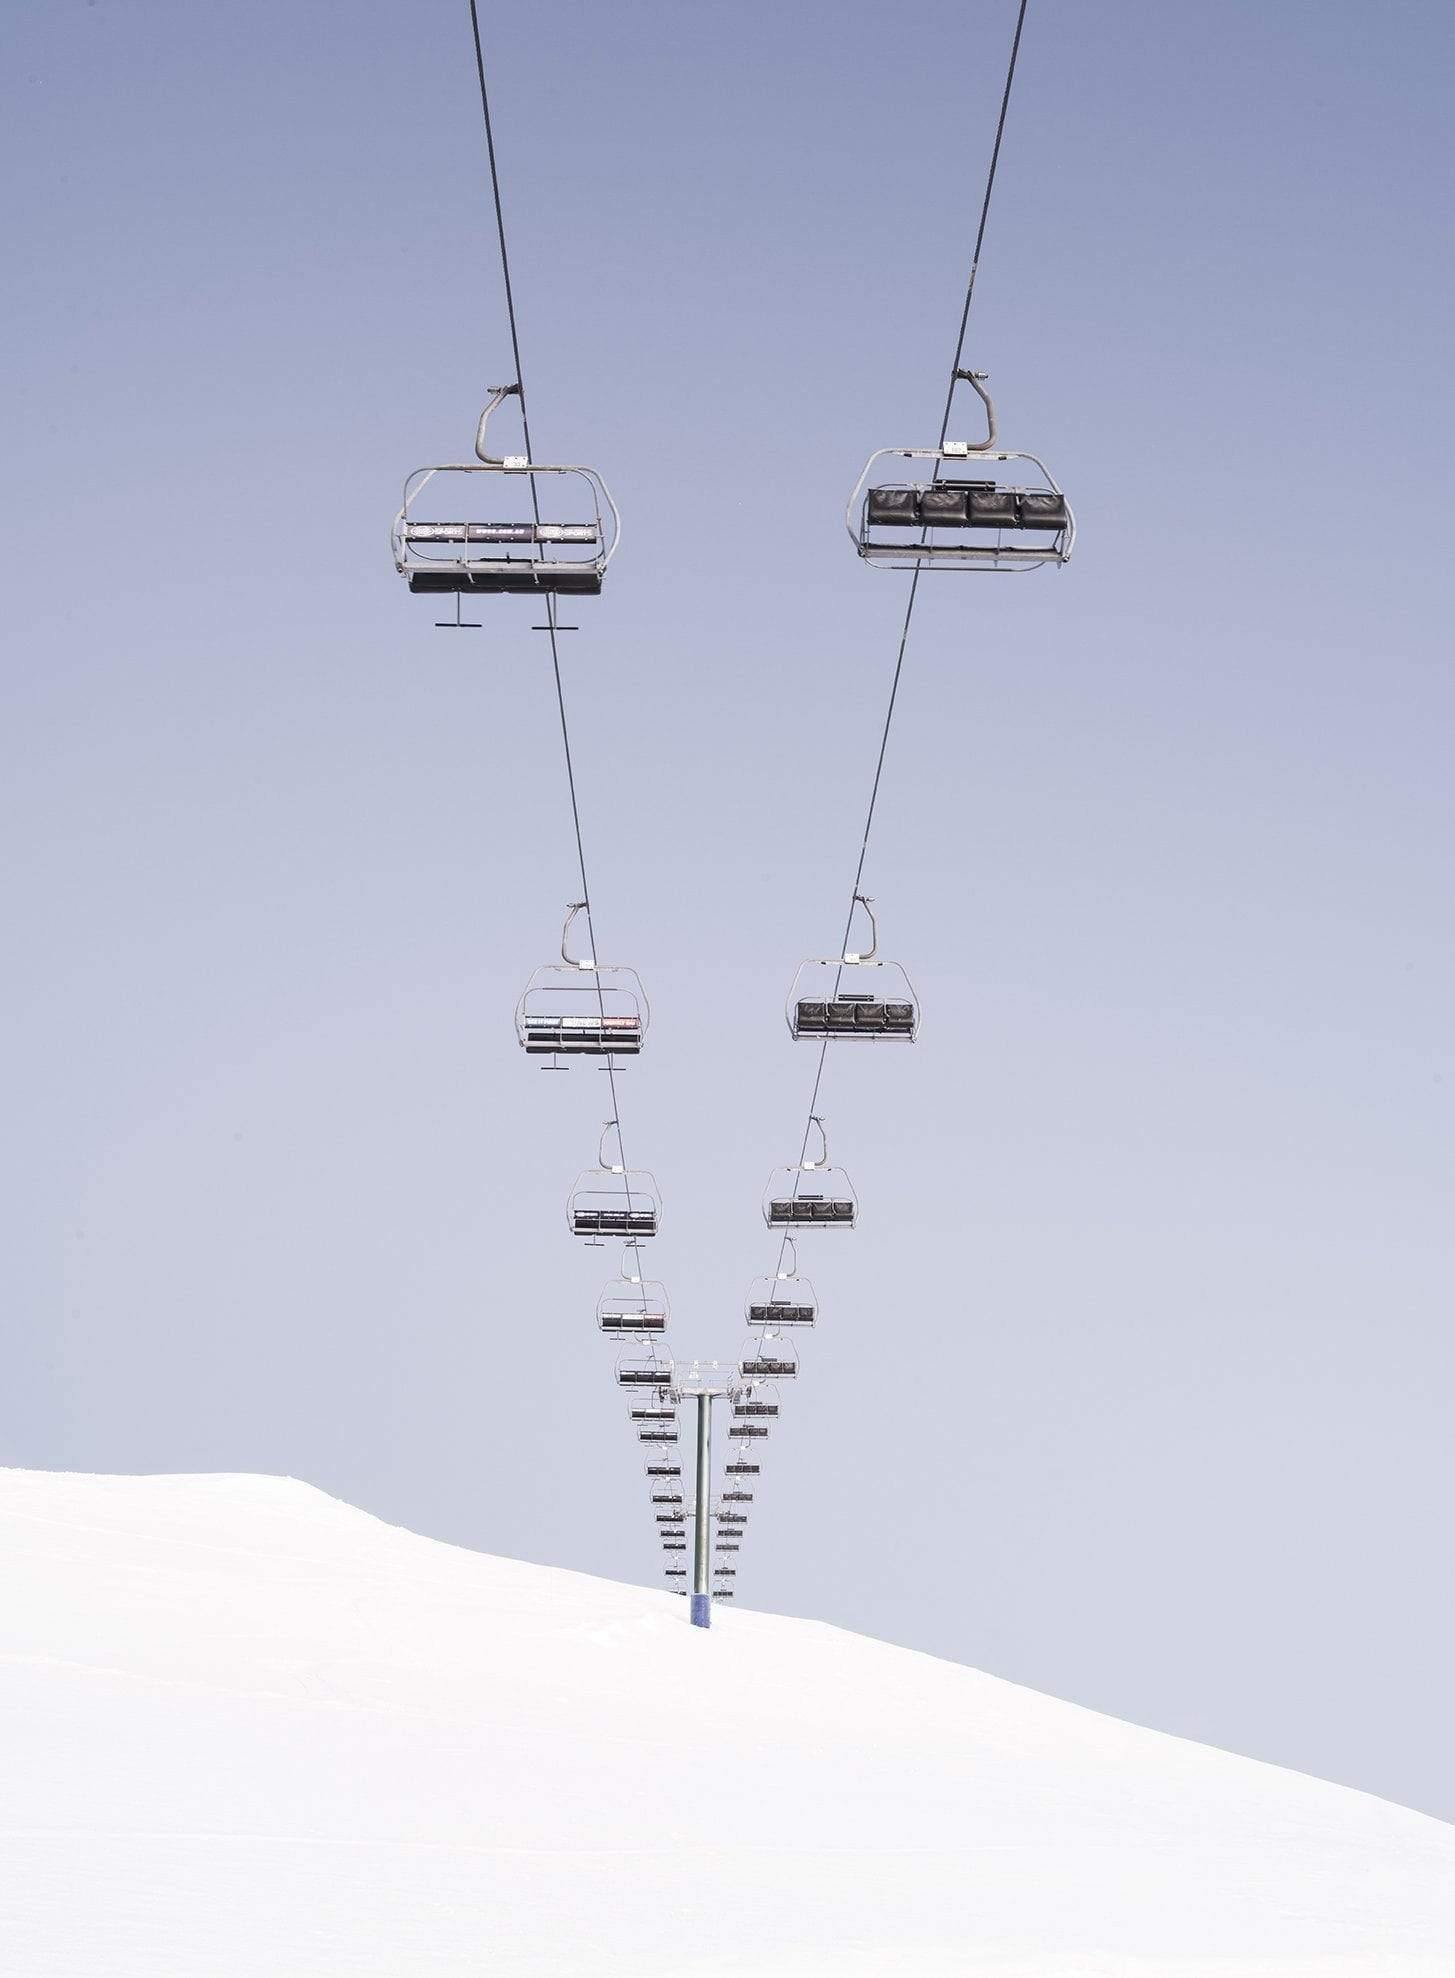 a beautiful view of a chairlifts series above the land fully covered with the fresh snow, Chairlift Mt Hotham, Victoria 